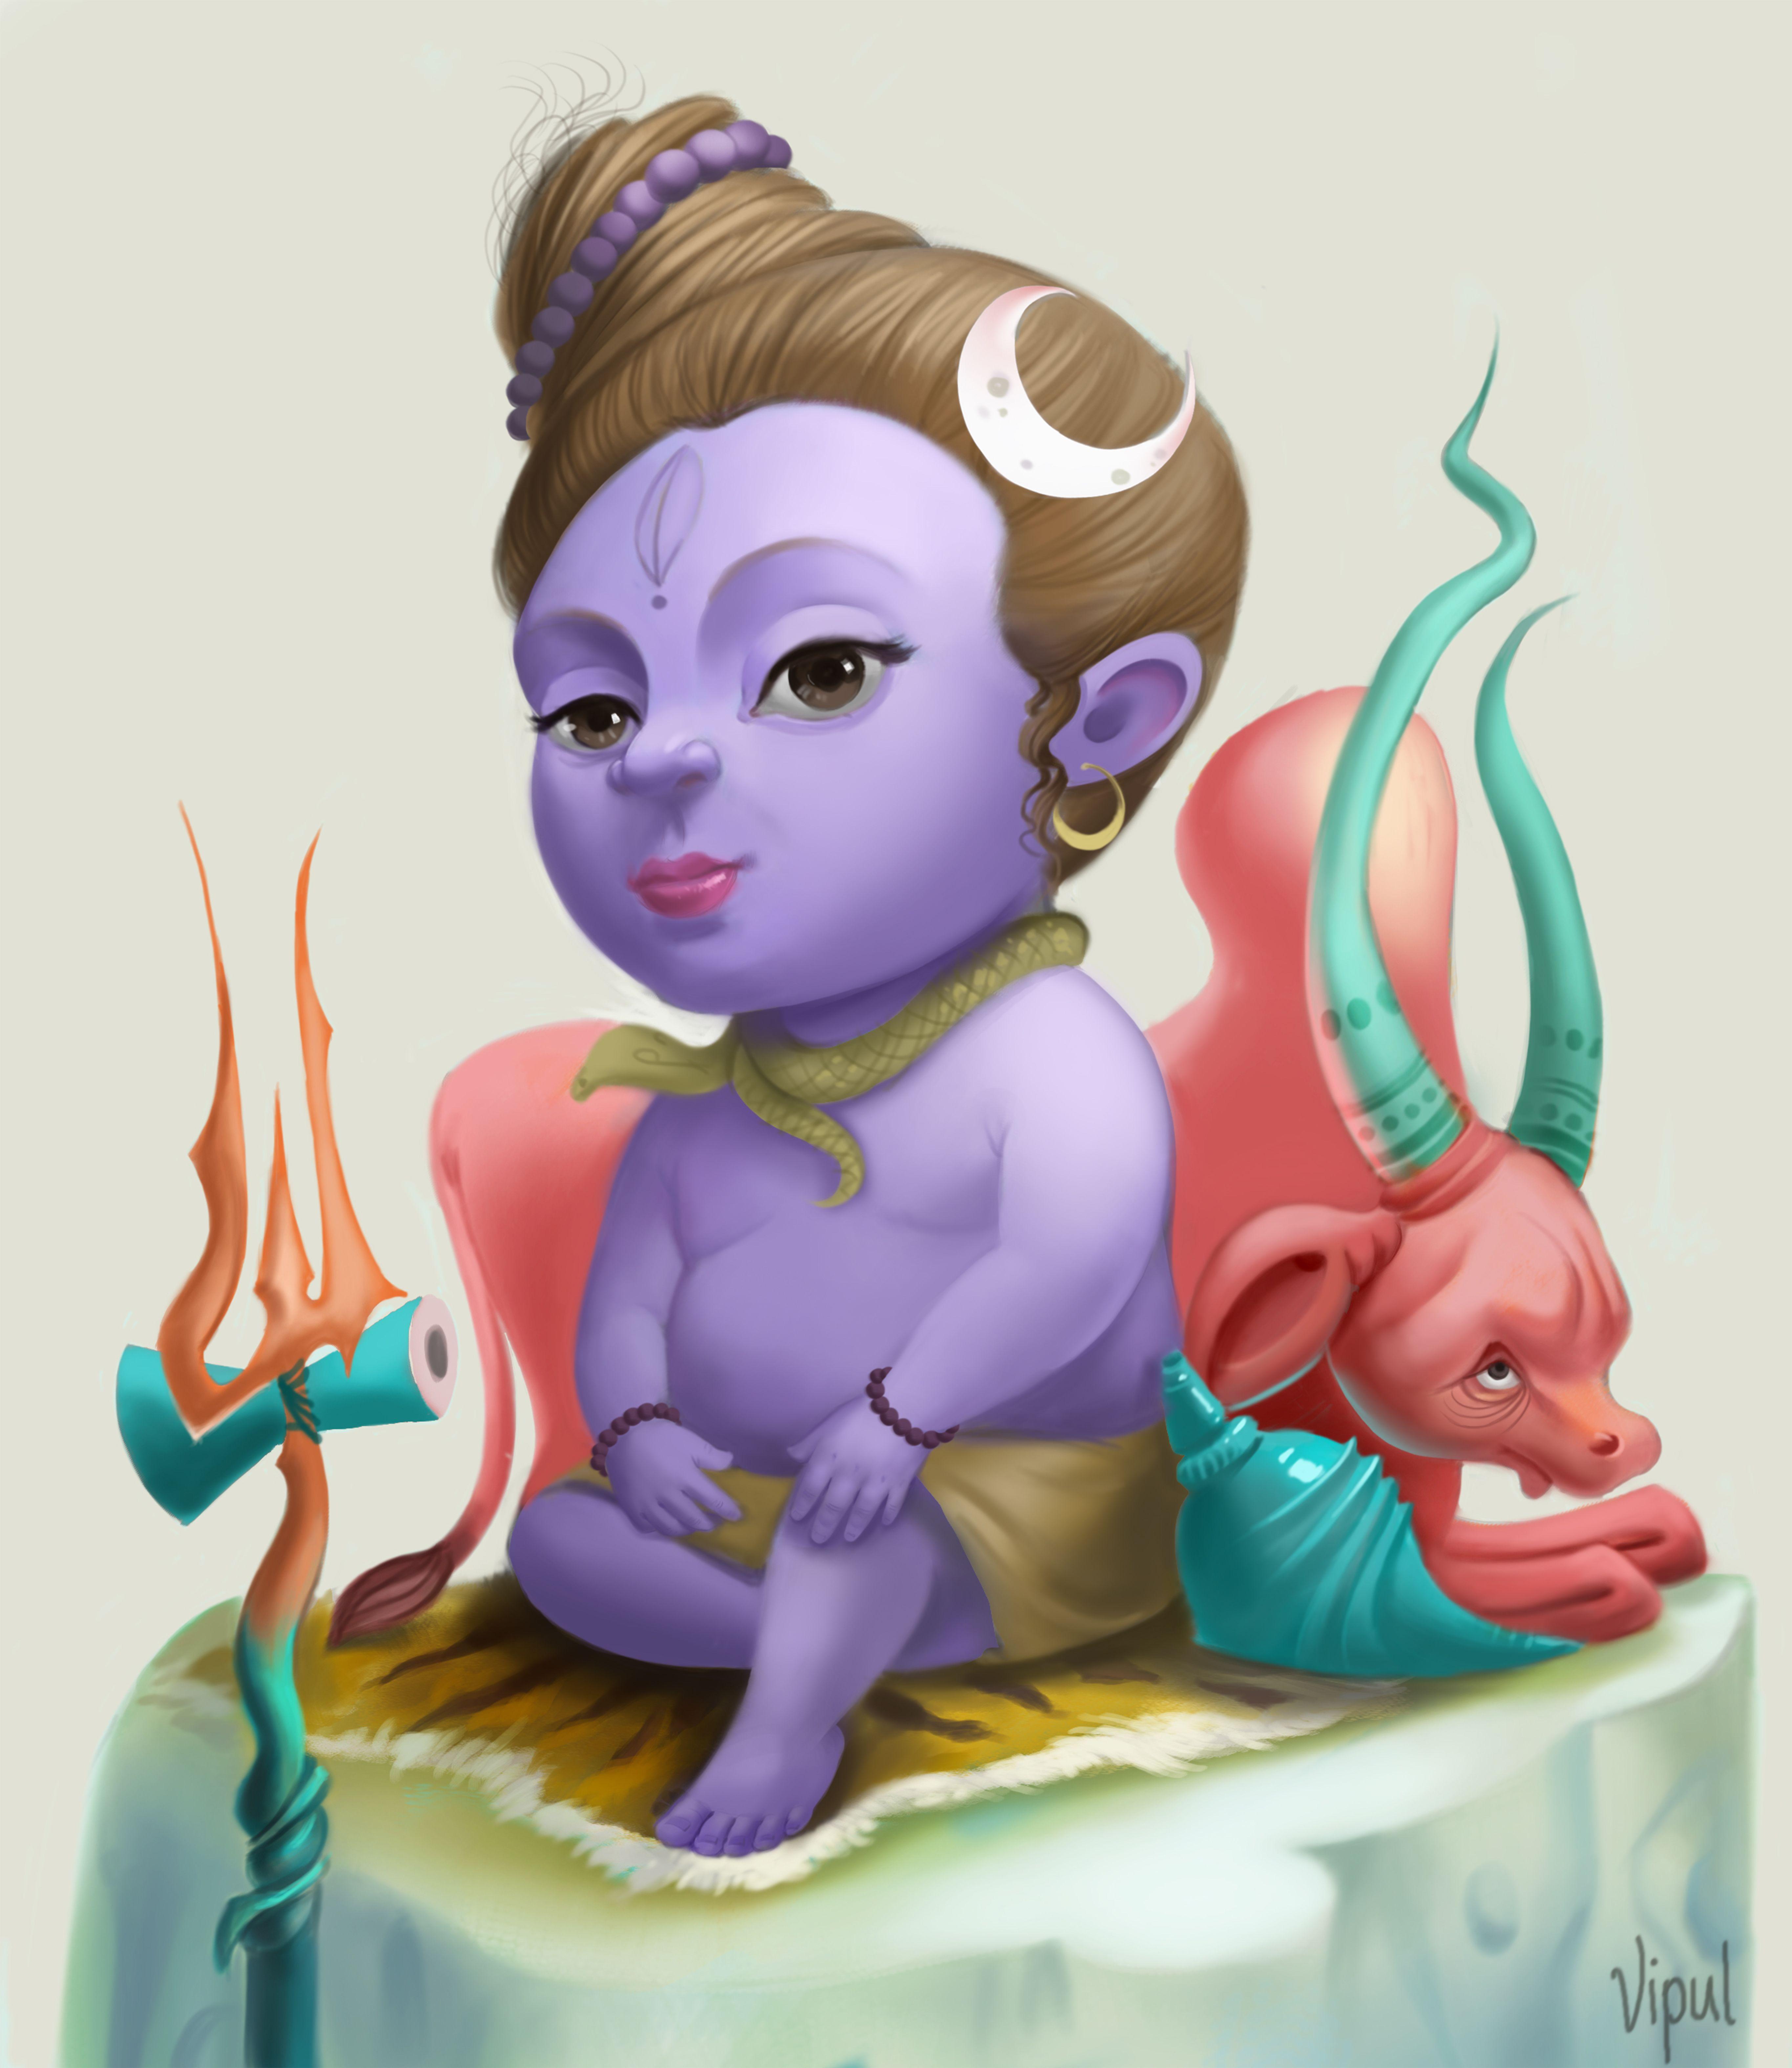 Bal Shiva art.This is a child form avatar of lord shiva .i made it because whenever i see for lord shiva referen. Lord shiva painting, Shiva art, Lord shiva